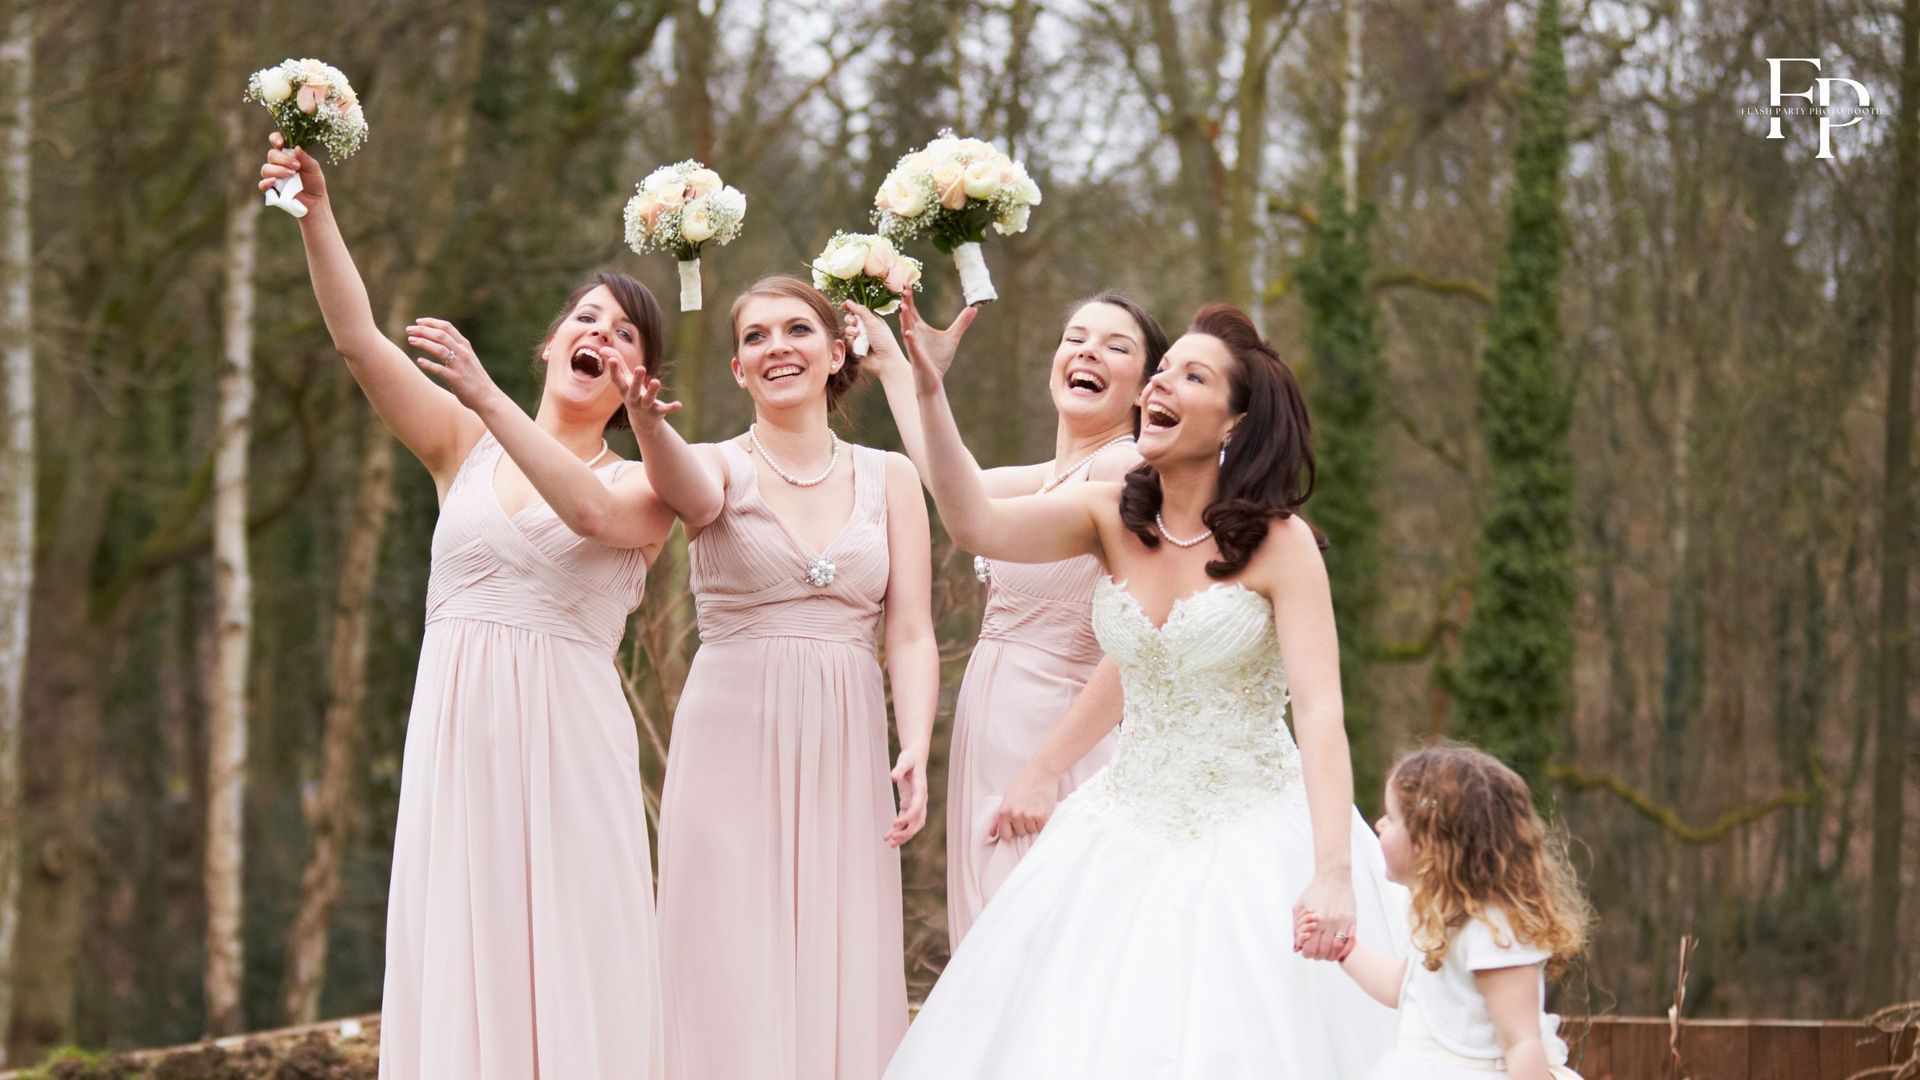 Bride and bridesmaids playfully toss their flowers in Sugar Land.